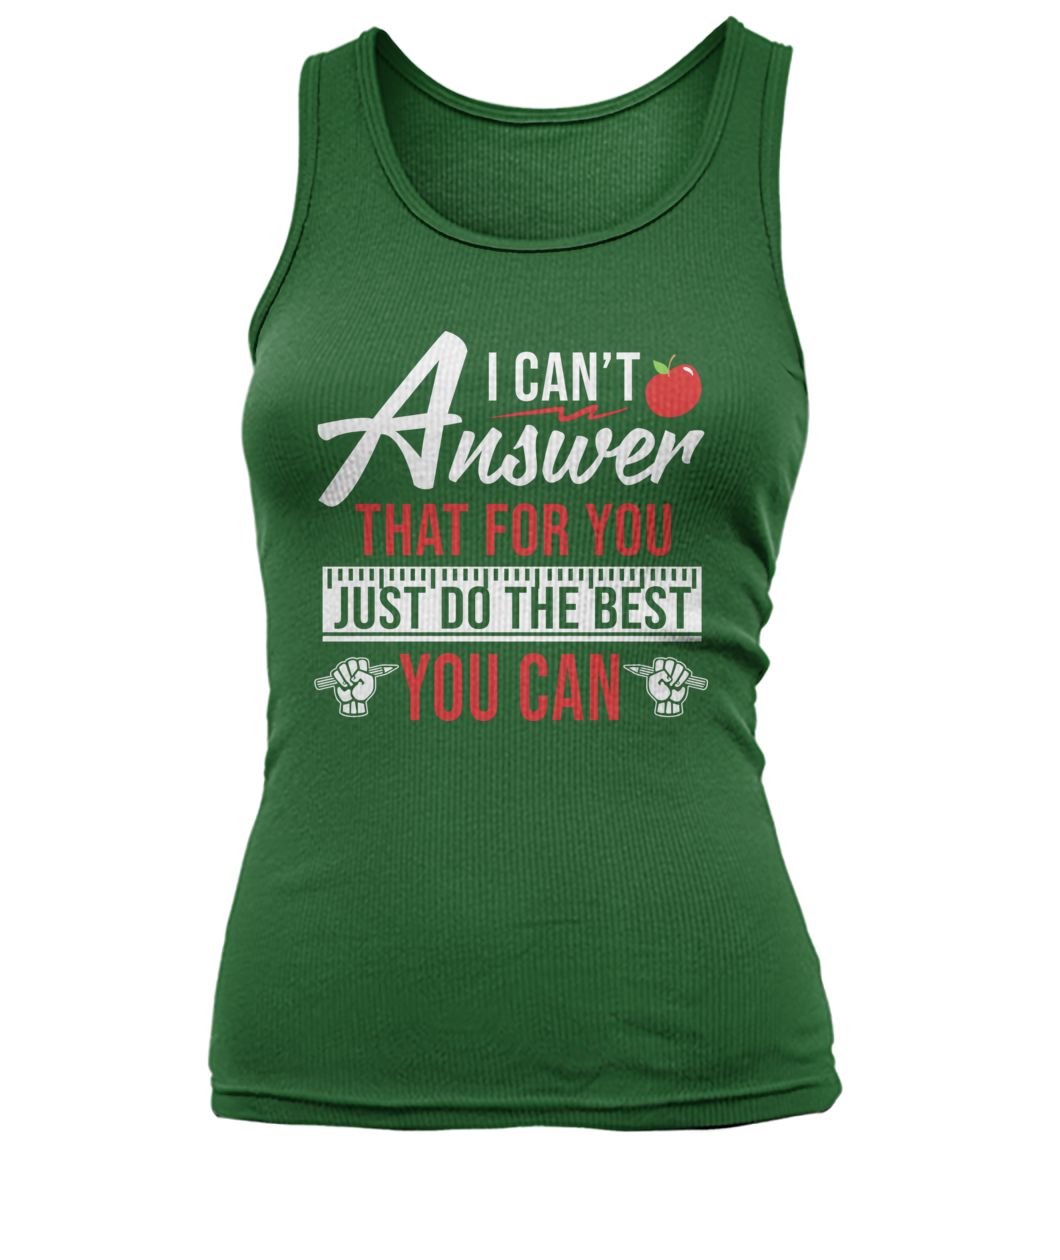 I can't answer that for you just do the best you can women's tank top